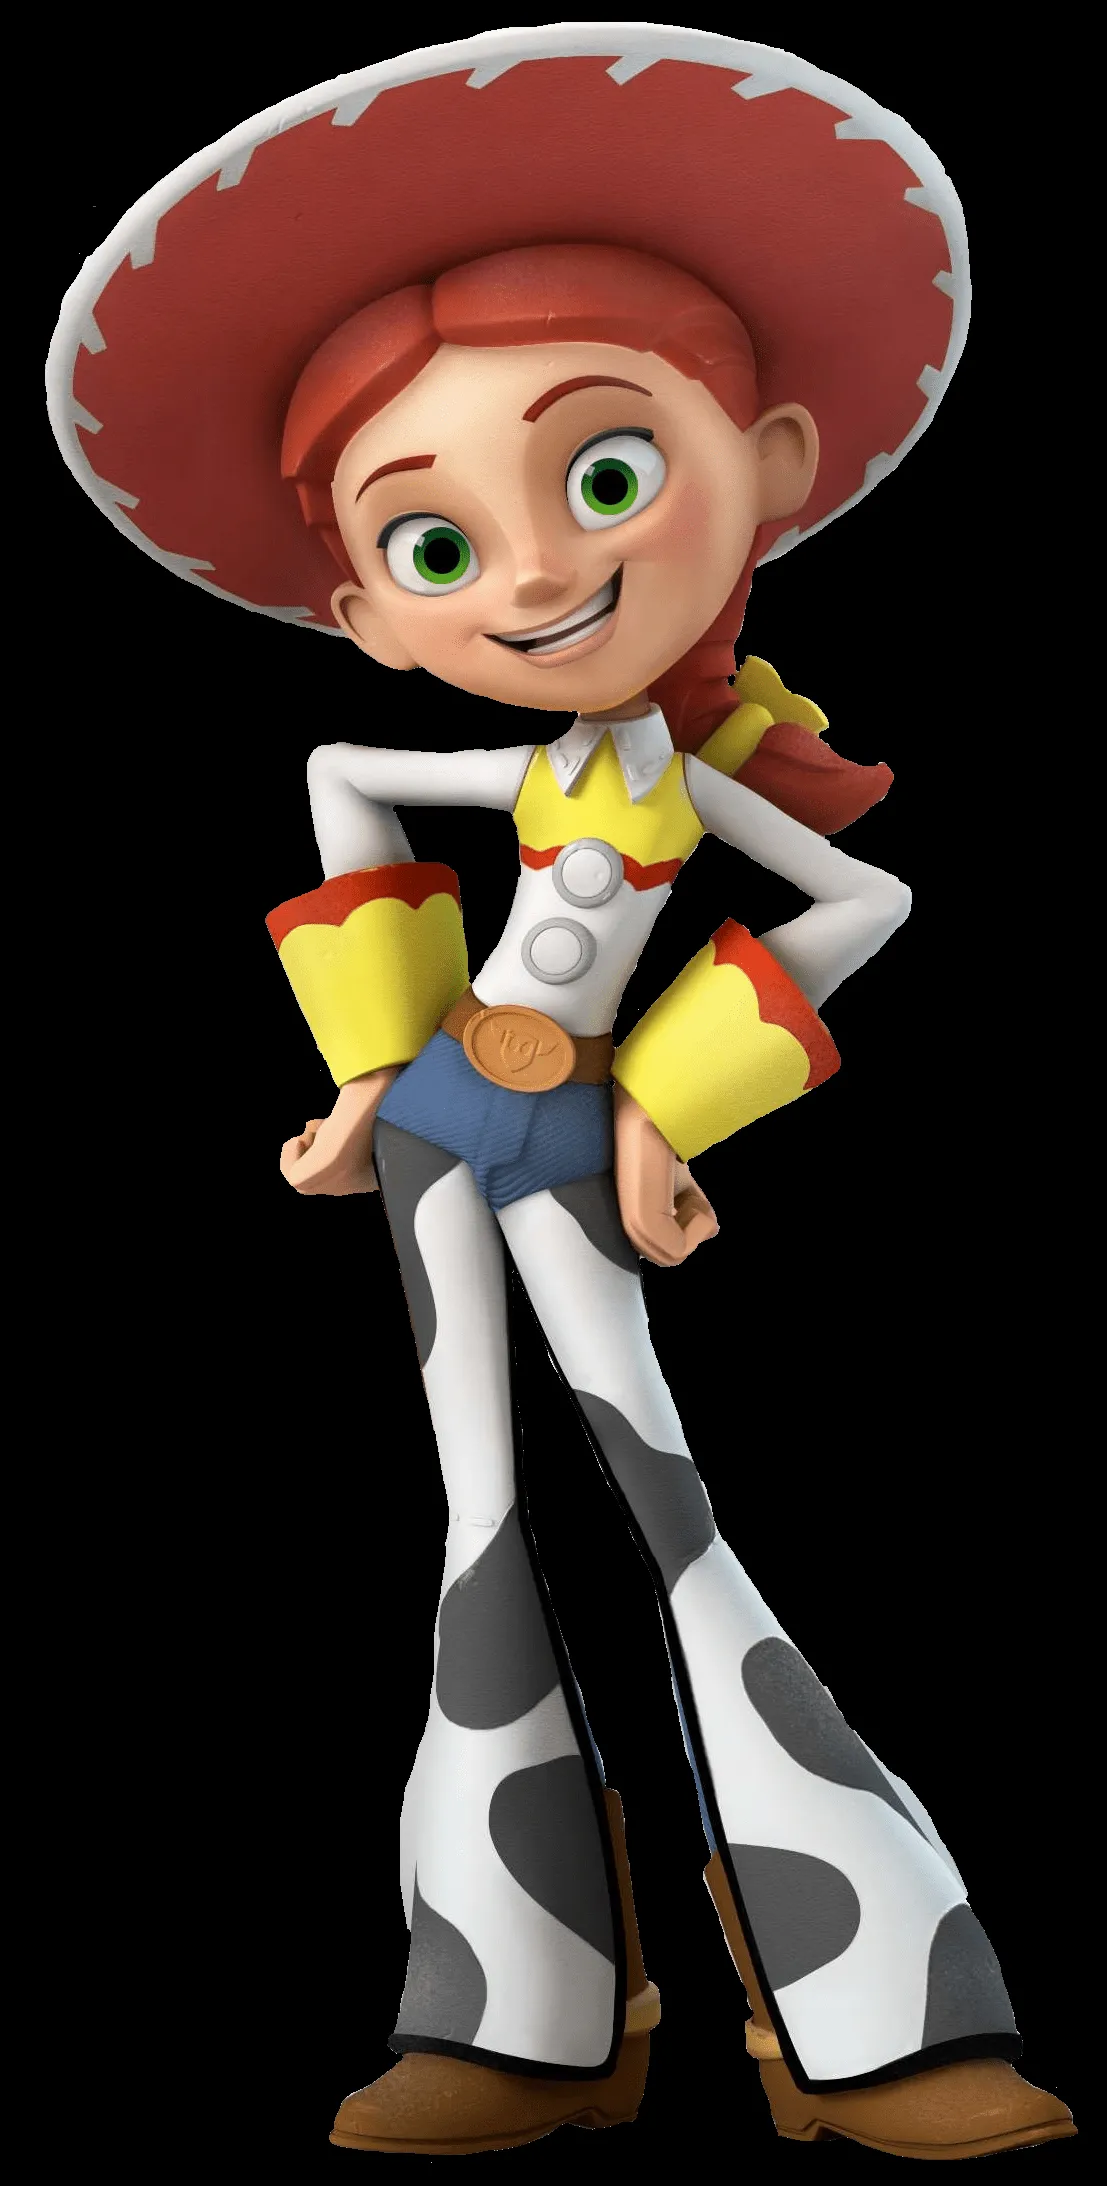 jessie from toy story - Google Search | Toy story personajes, Dibujos toy  story, Jessie de toy story